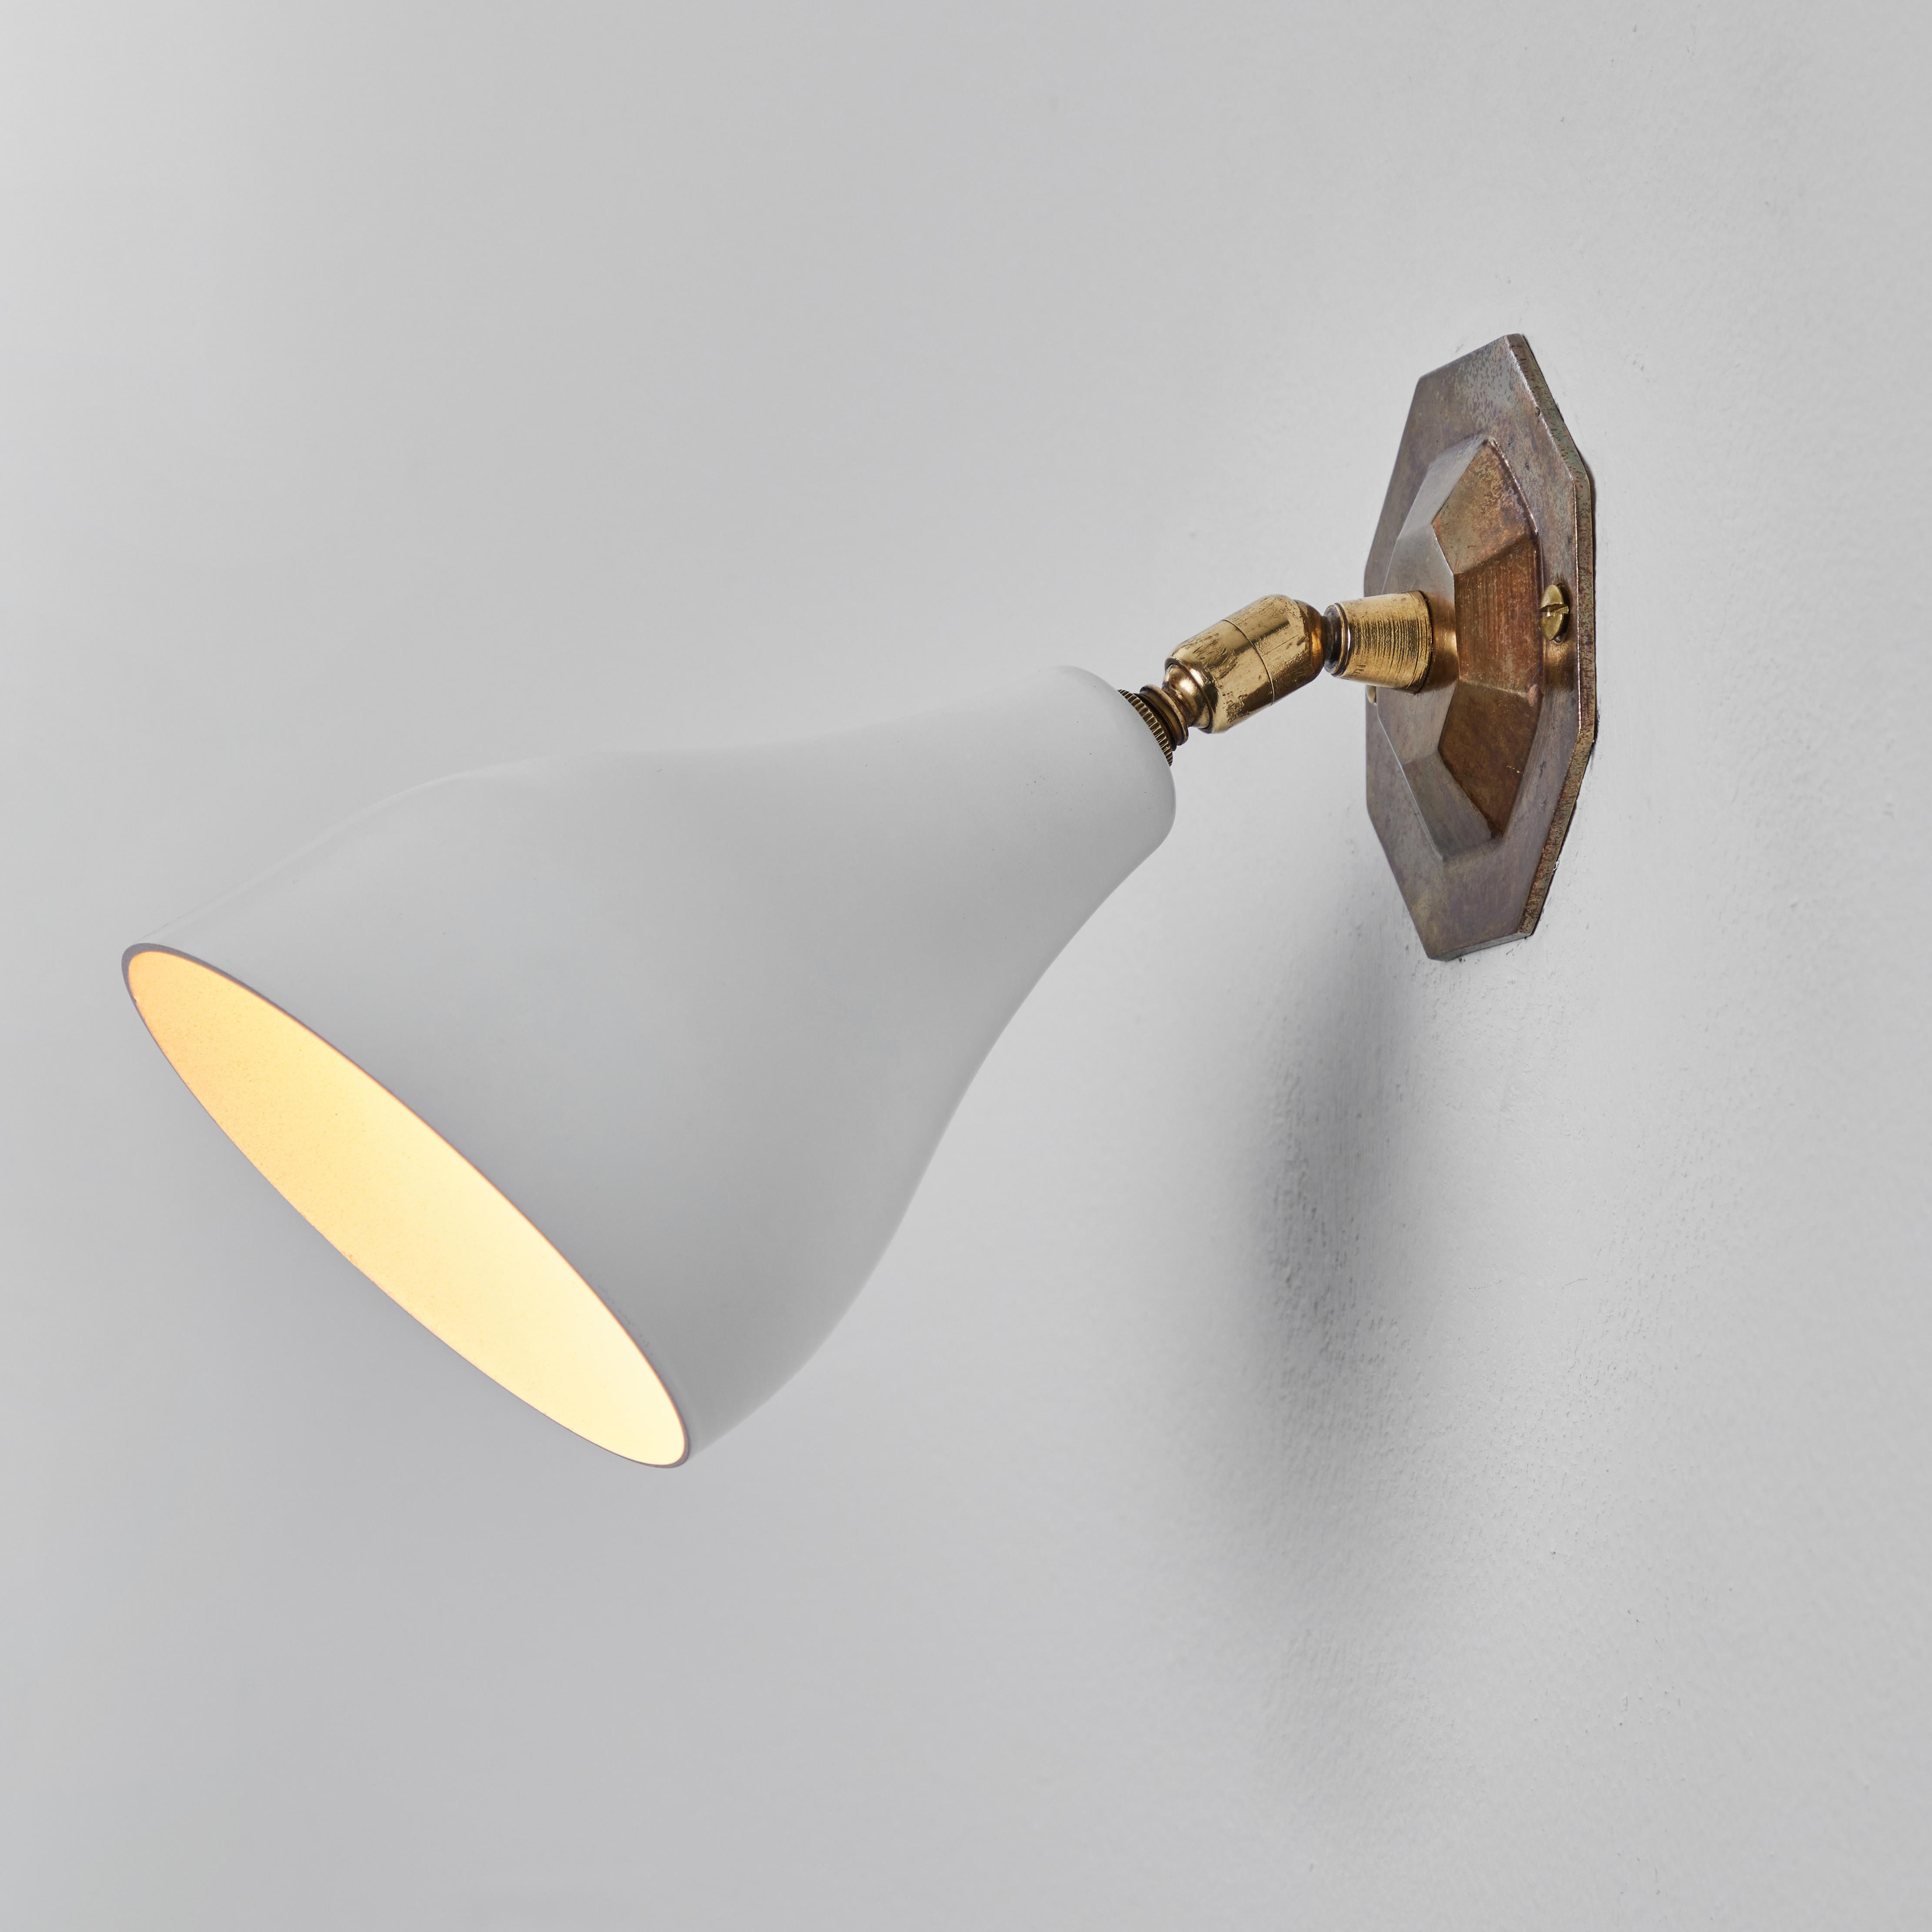 Gino Sarfatti Model #26B Wall Lamp for Arteluce. Executed in white painted aluminum with a geometric patinated brass backplate. Double ball jointed arm allows flexible shade adjustments and multiple configurations. The simplicity of Sarfatti's